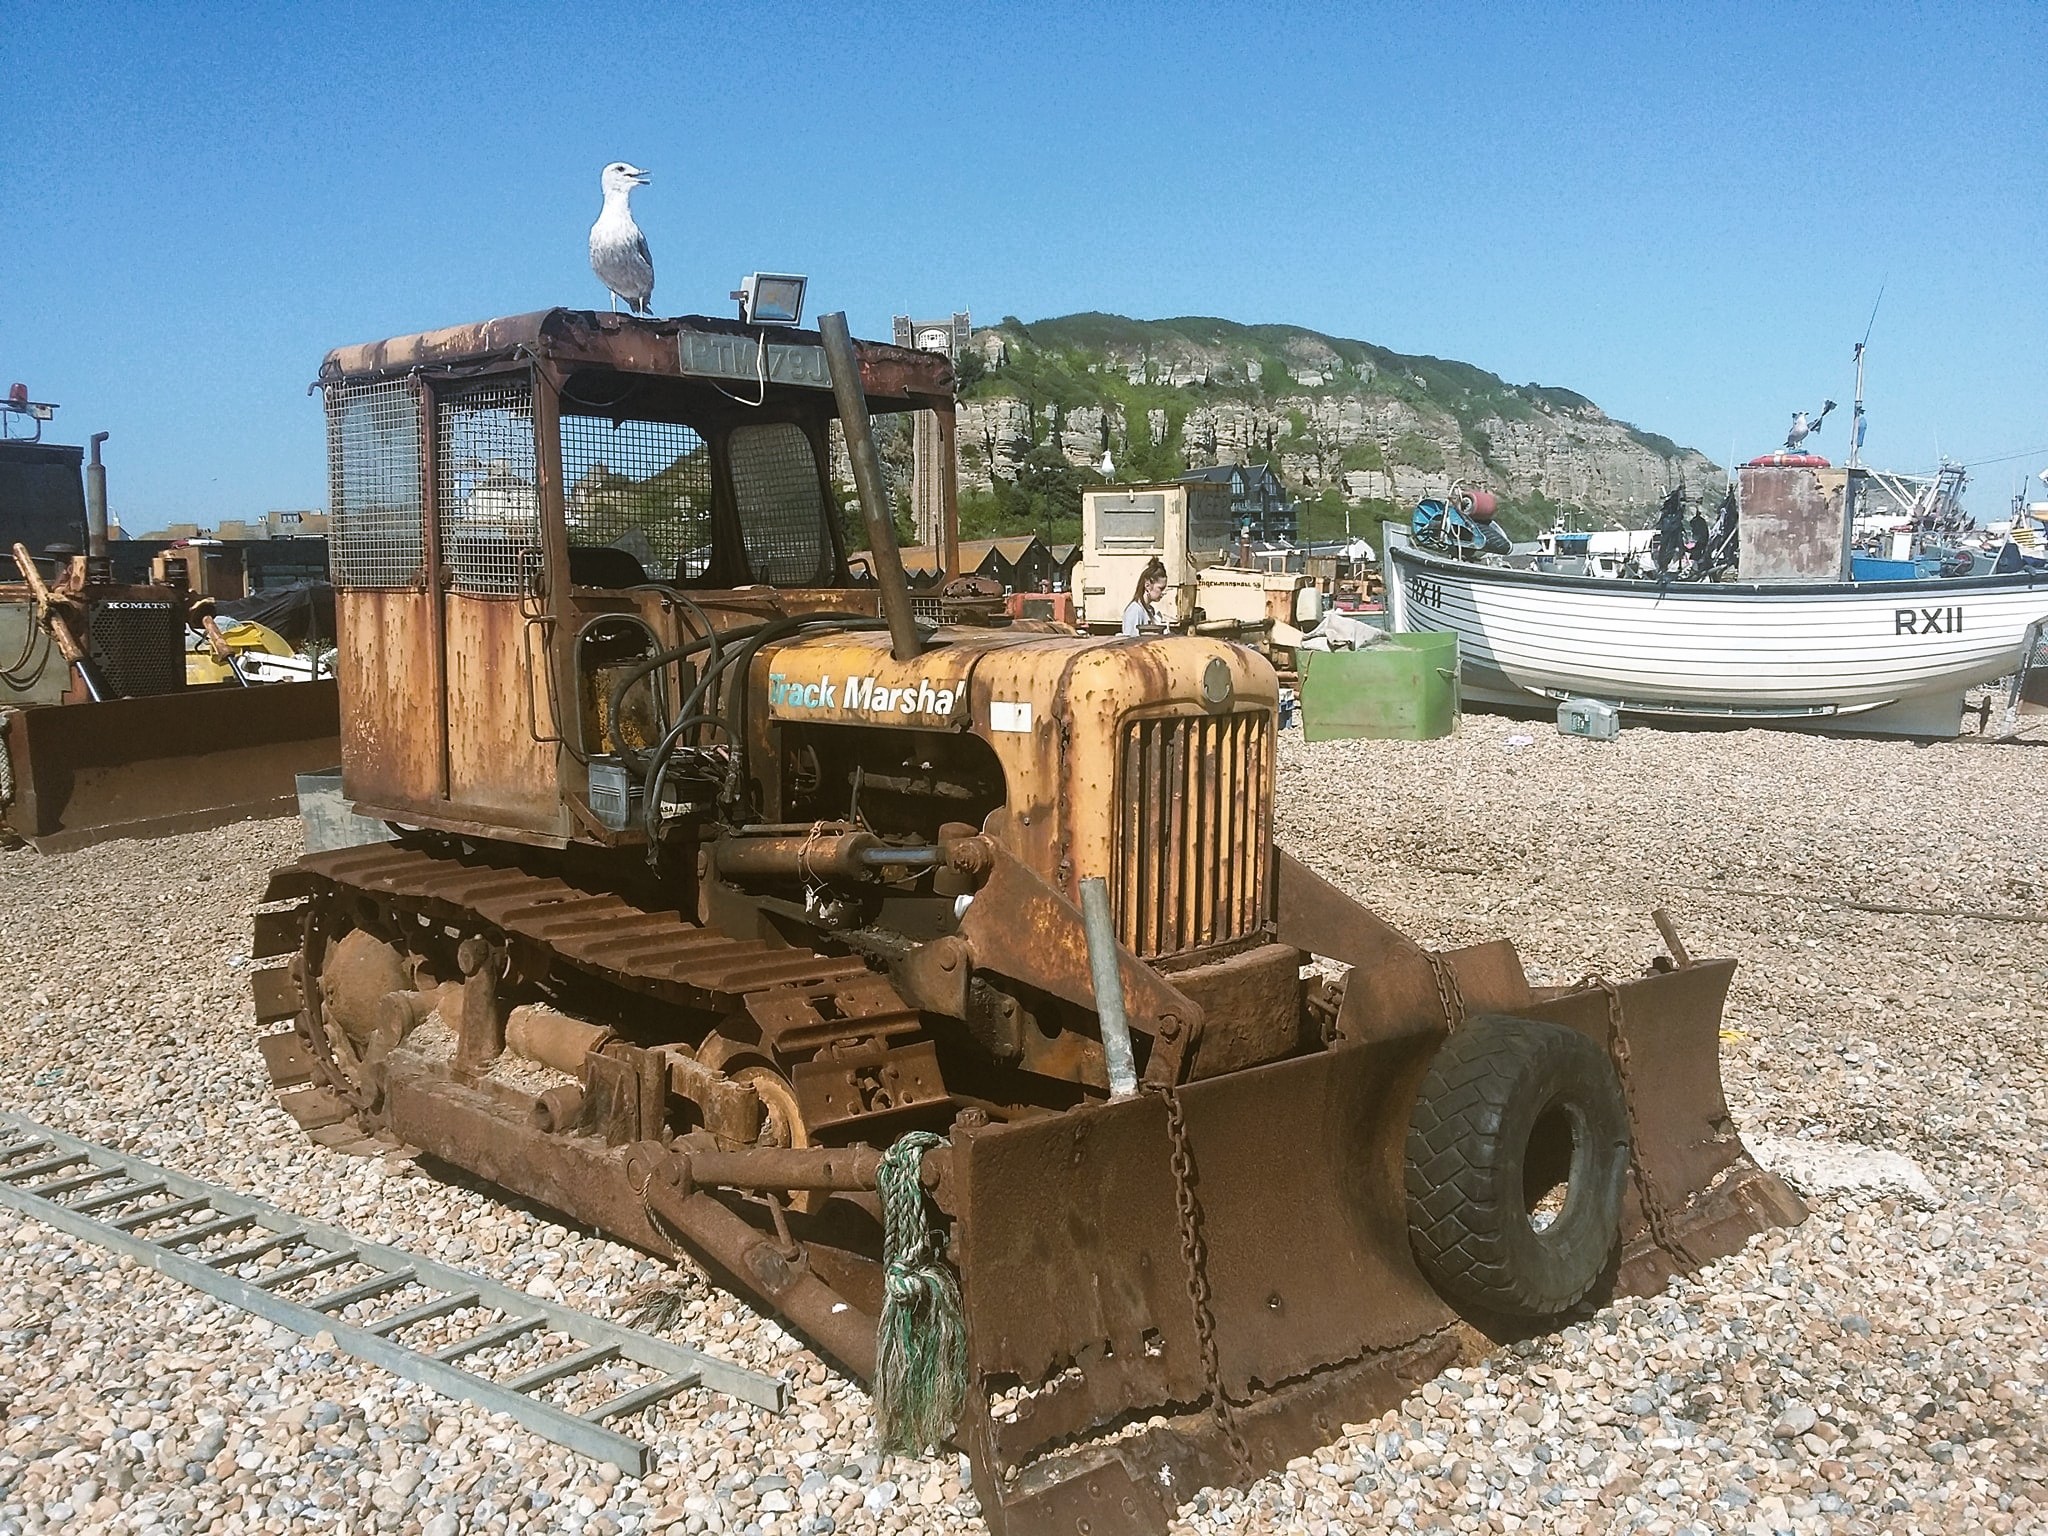 A seagull sits atop a rusty tractor with plough on the beach in Hastings, England